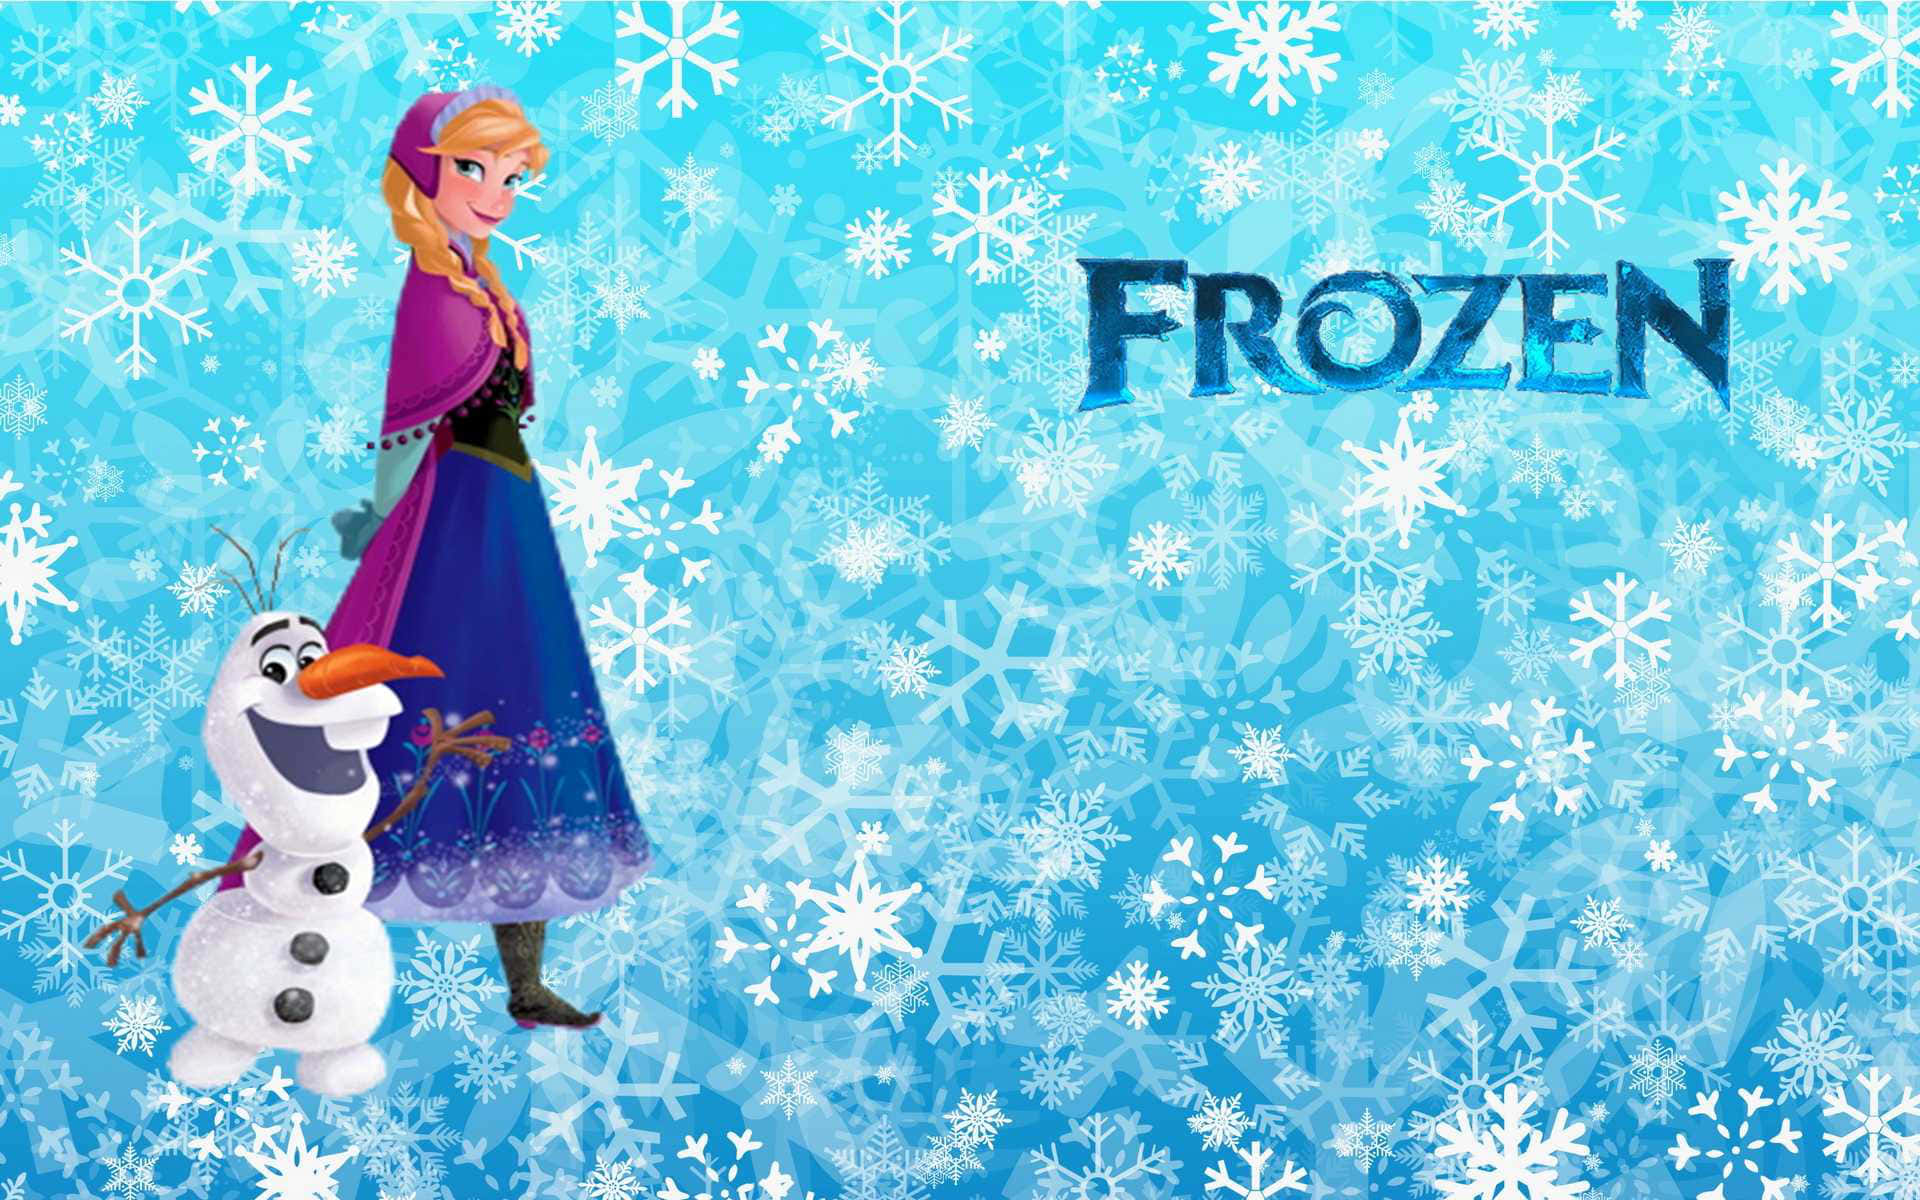 Magic and adventure awaits in the captivating world of Frozen!